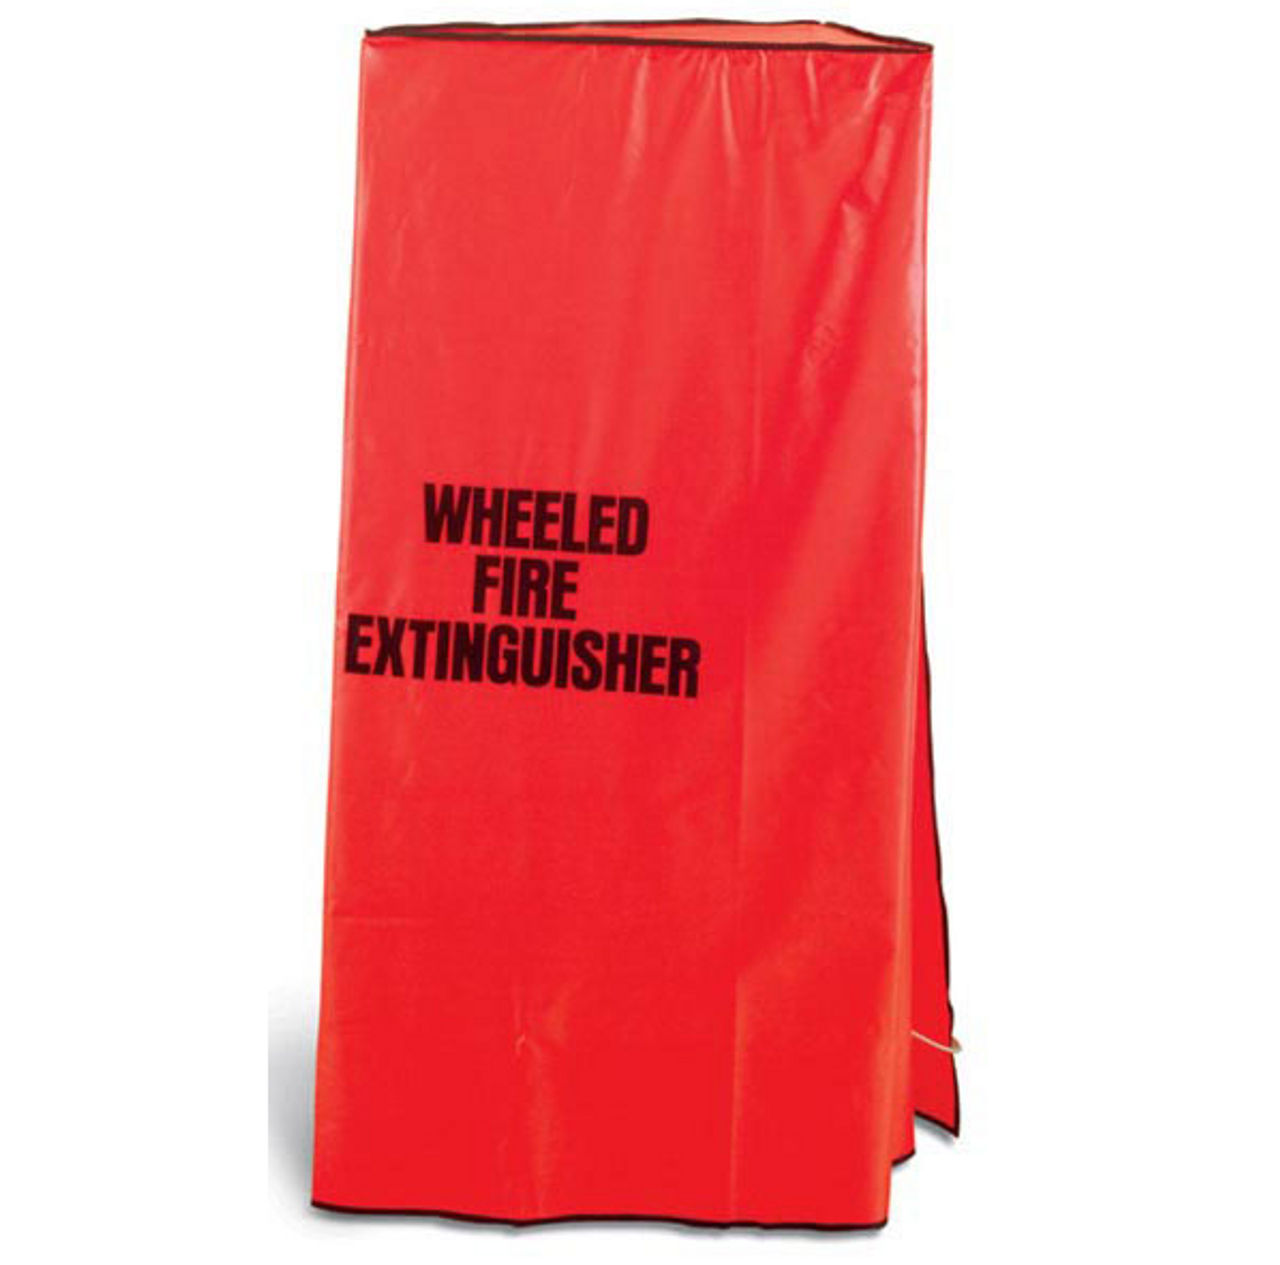 WUC50 - 50 lb Dry Chemical Vinyl Wheeled Fire Extinguisher Cover